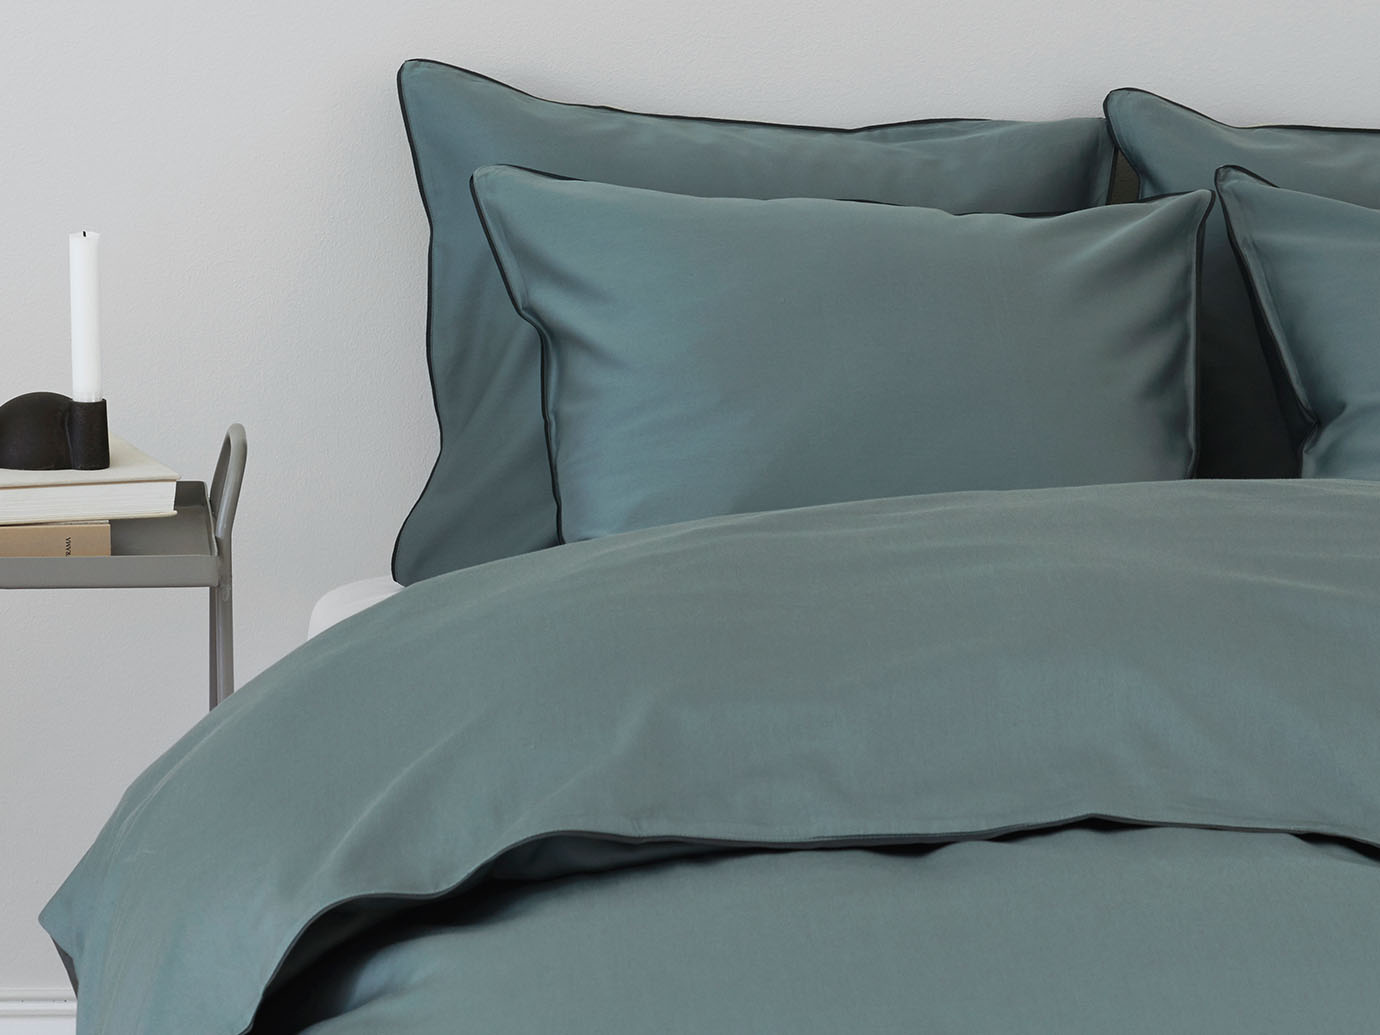 Duvet Cover Strimma - Washed Bottle Green in the group Bedding / Duvet Covers at A L V A (1167)